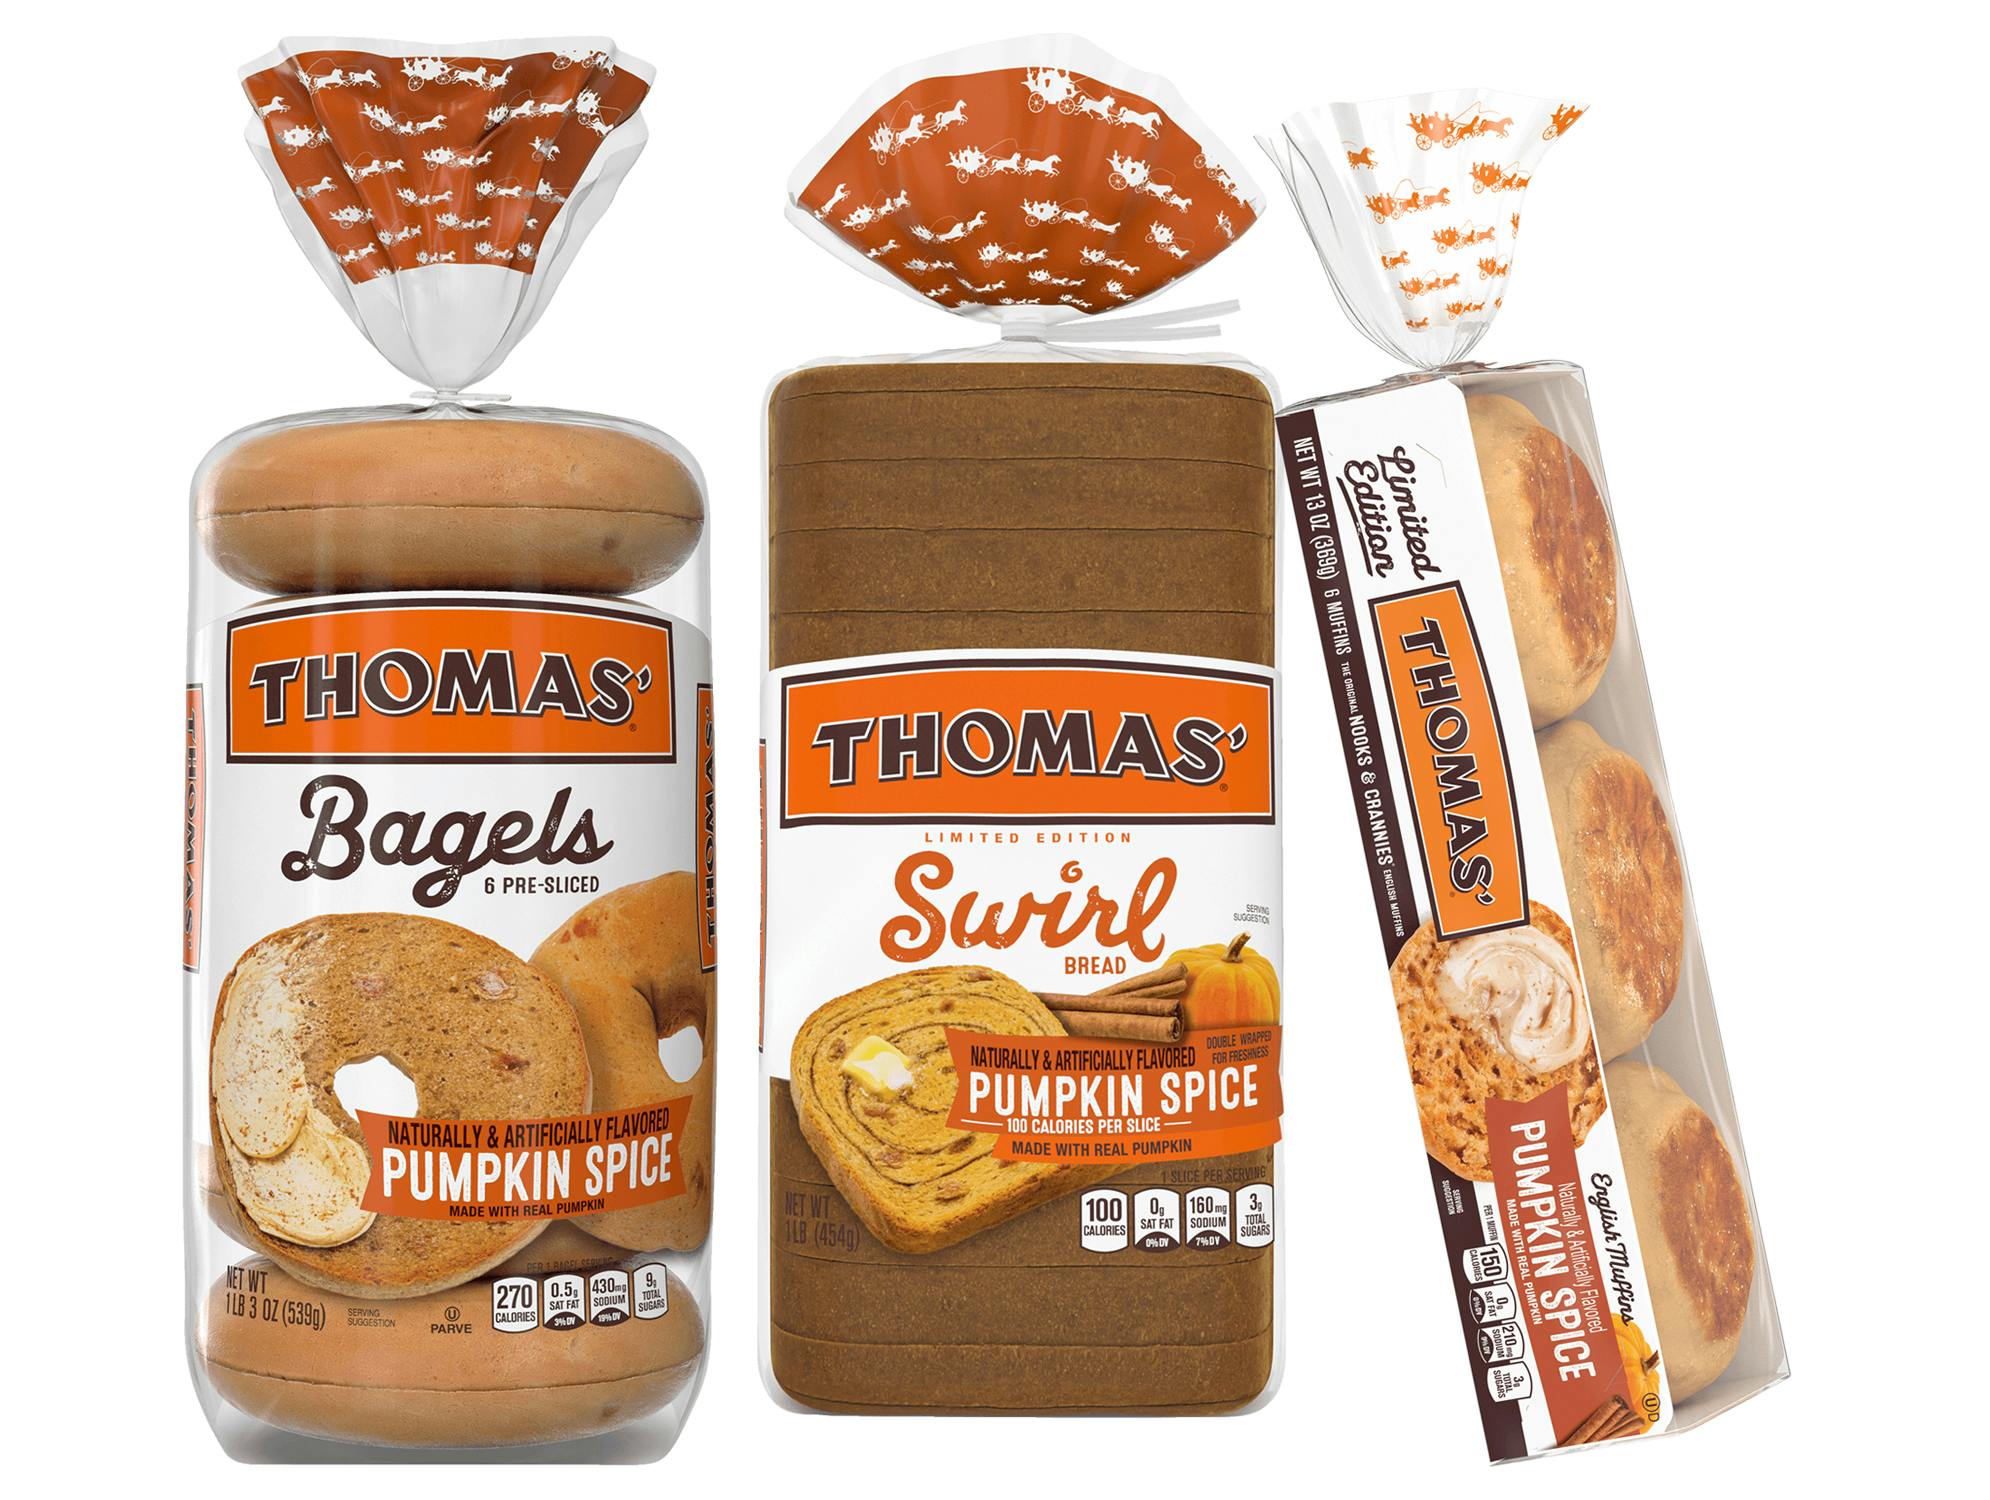 Thomas' pumpkin spice bagels, swirl bread, and english muffins products